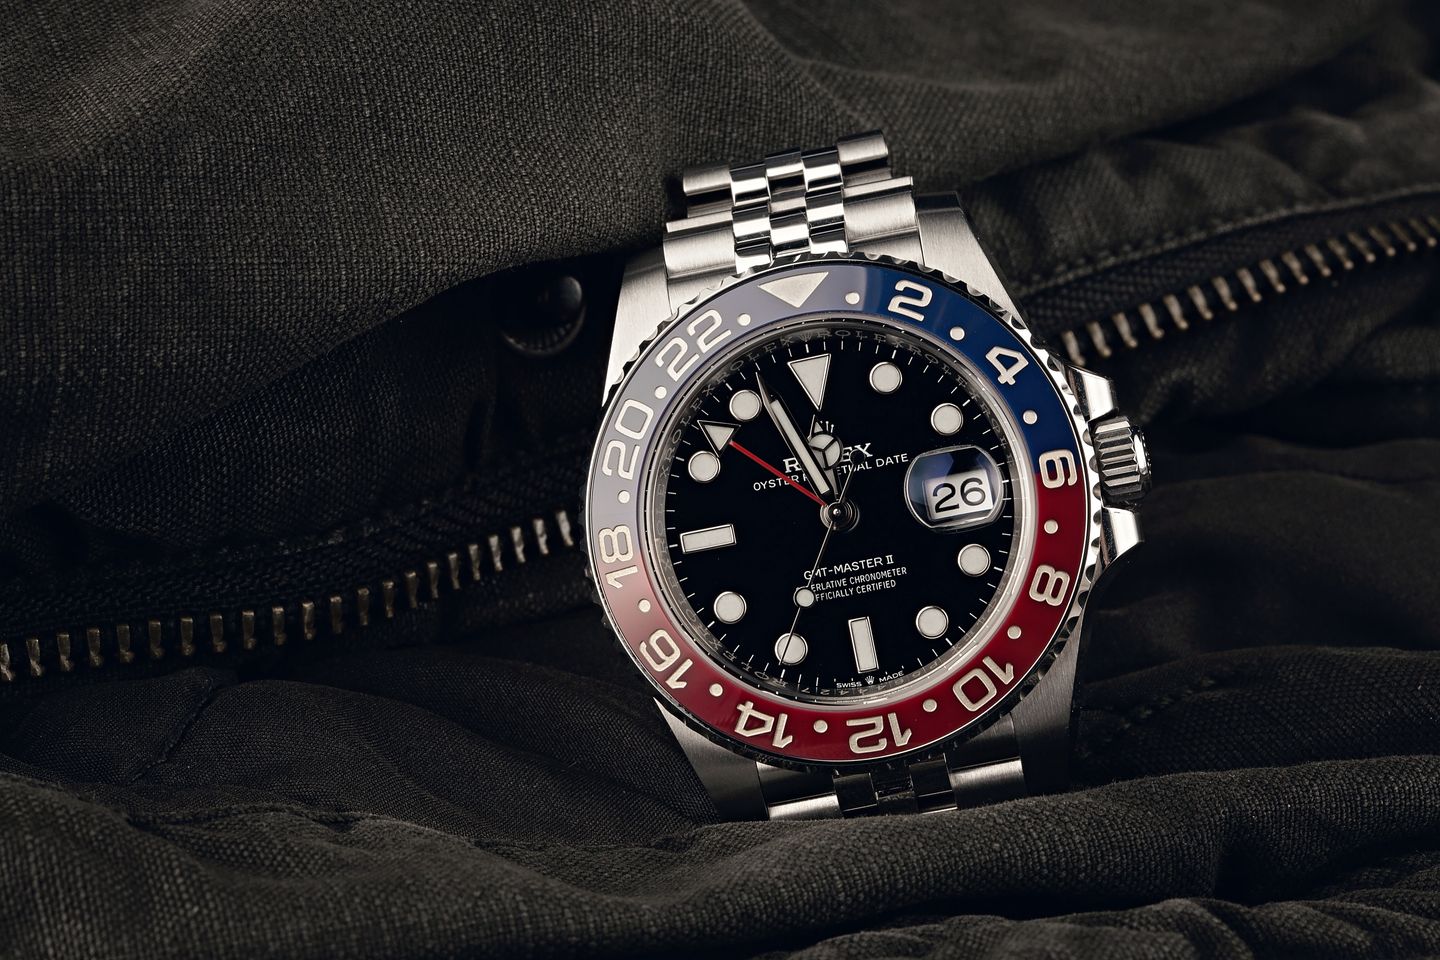 Top 3 Things Buy Rolex Investment